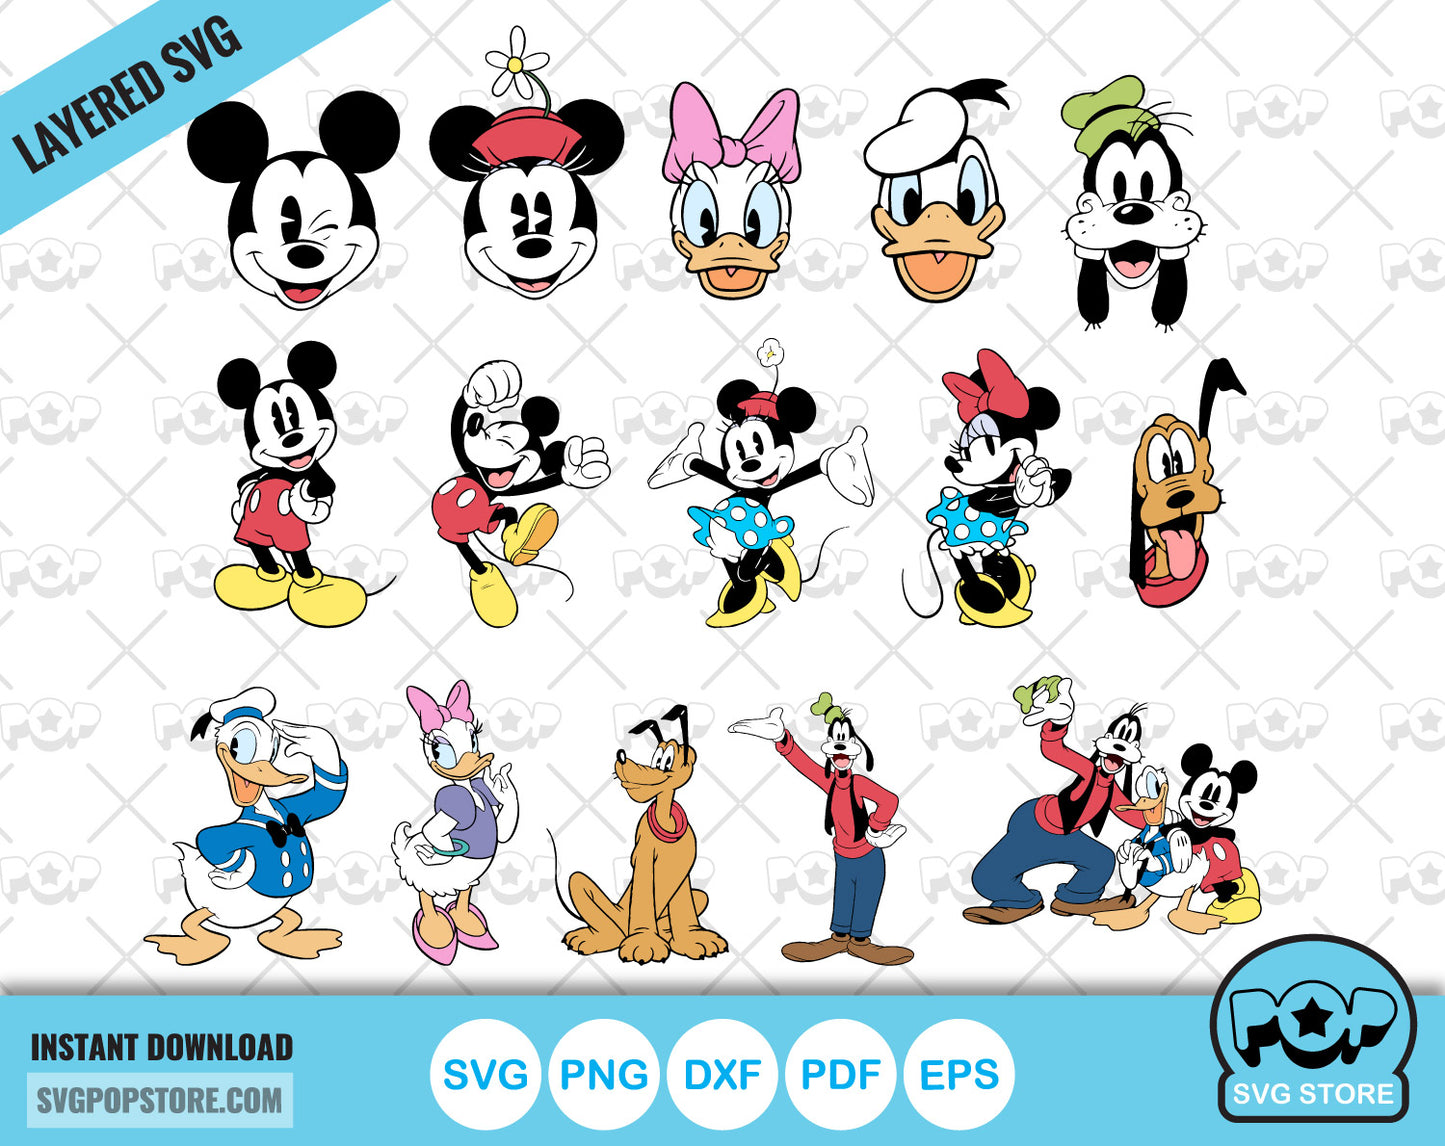 Classic Mickey and Friends clipart set, svg cut files for Cricut / Silhouette, Mickey & friends png